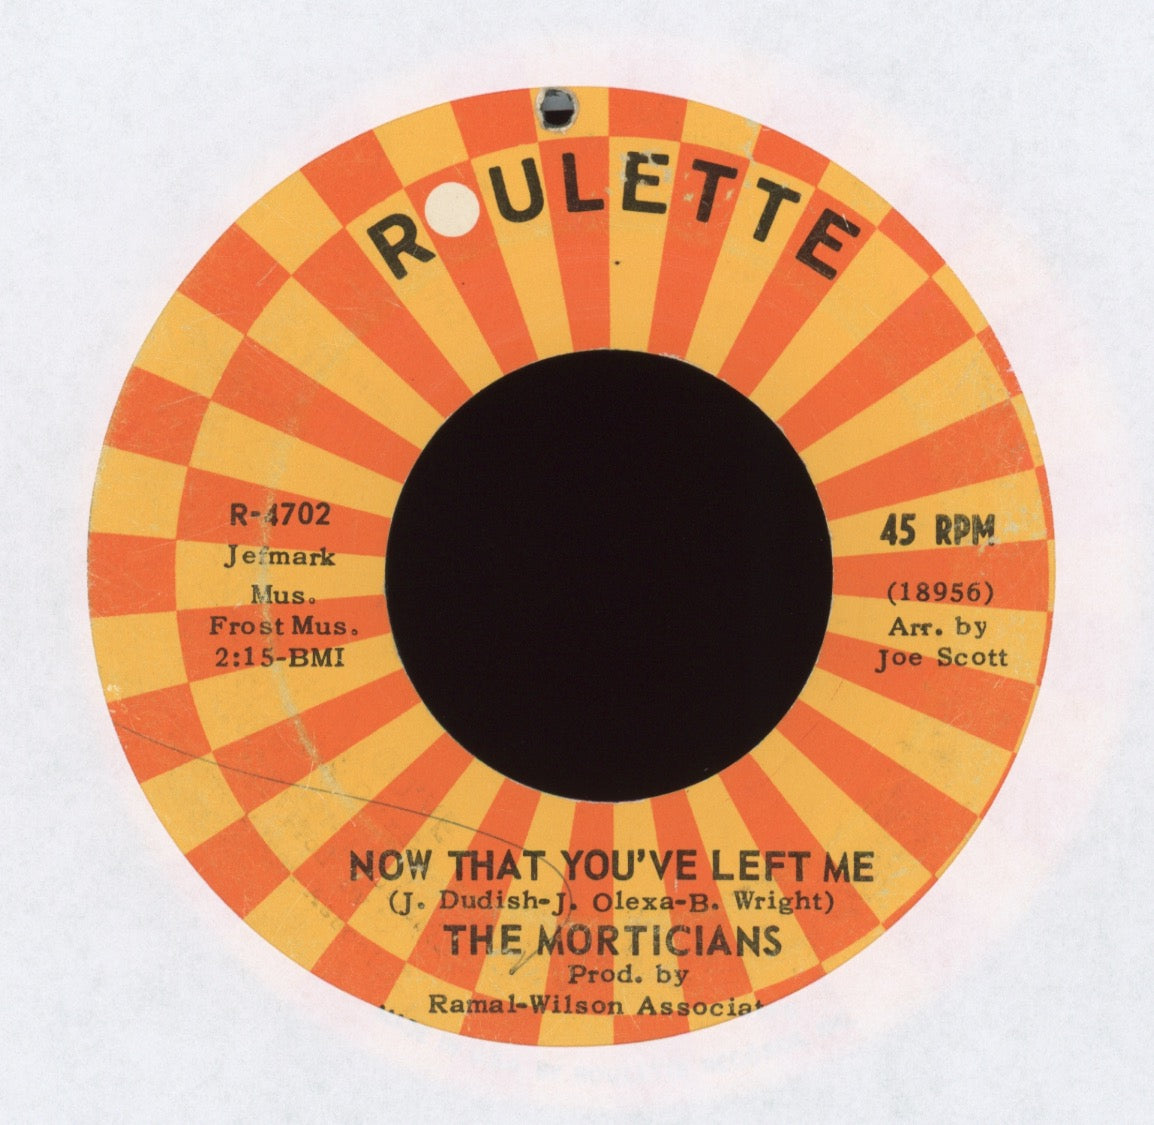 The Morticians - Now That You've Left Me on Roulette